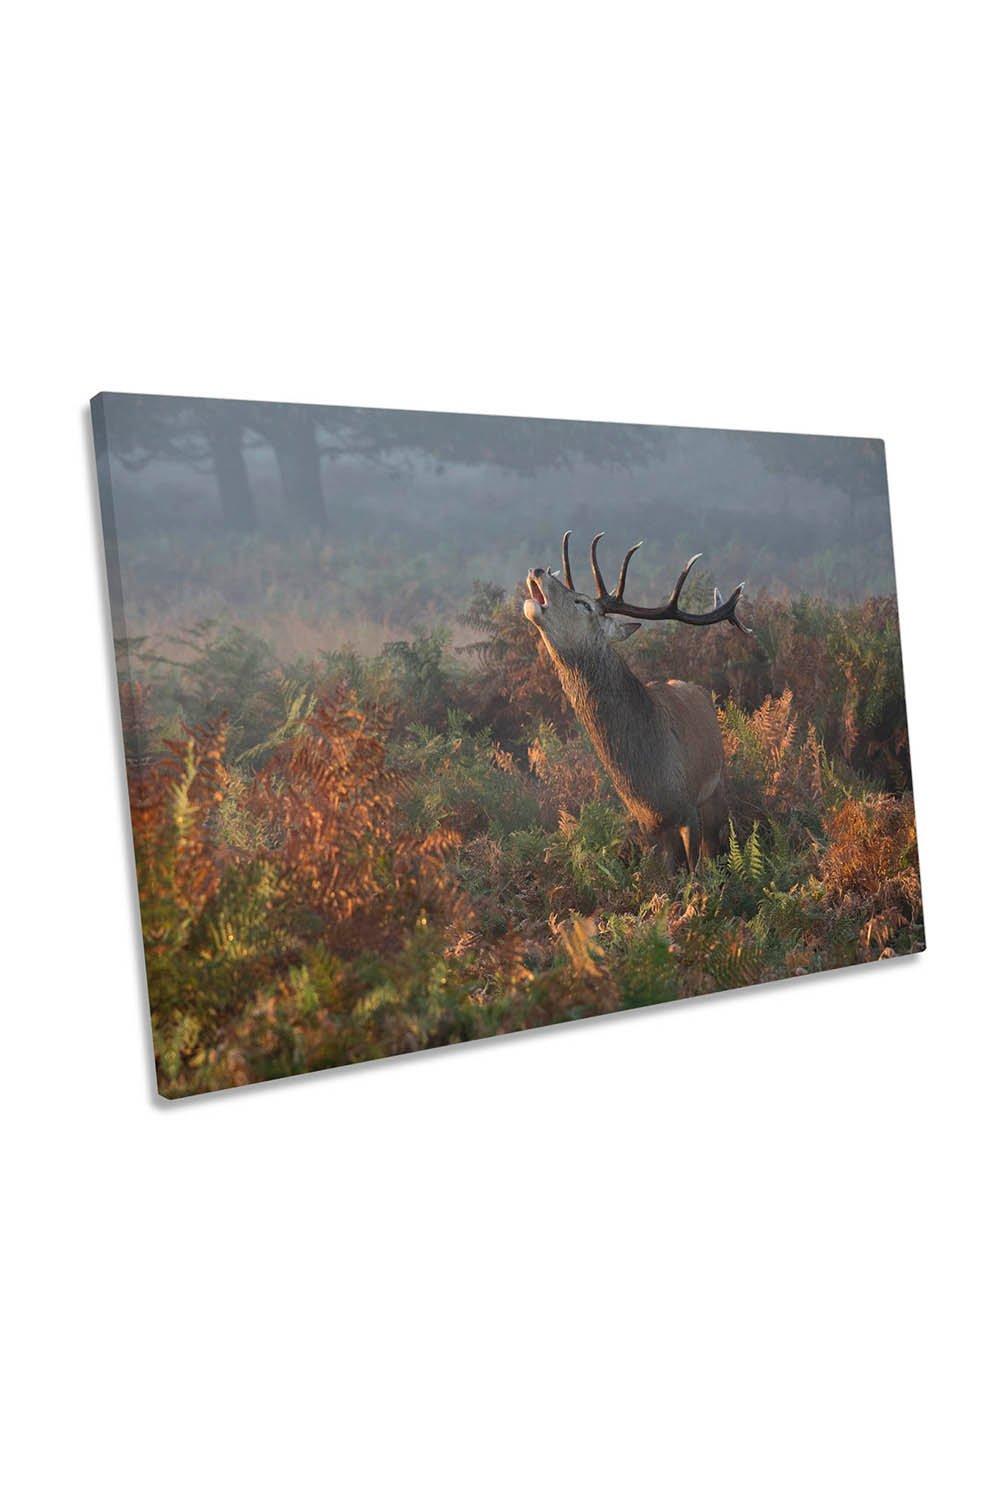 Bellowing Stag Deer Antlers Canvas Wall Art Picture Print